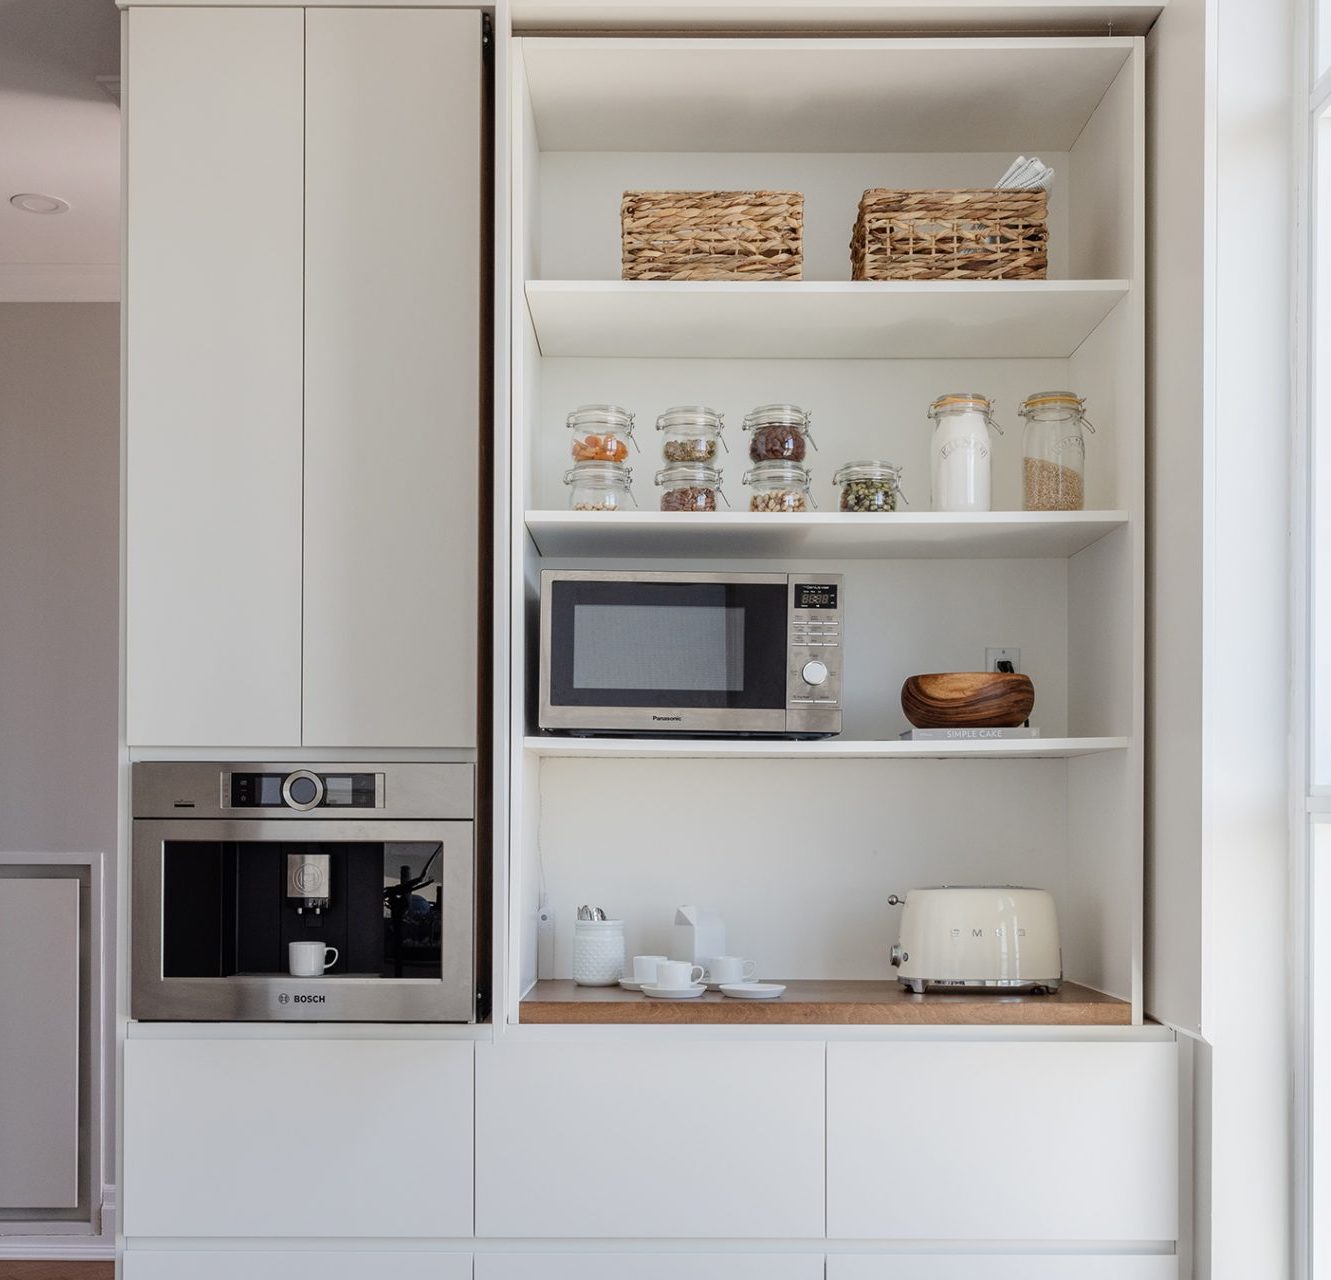 Appliance Garage in a modern kitchen with a microwave, a toaster and cutlery.